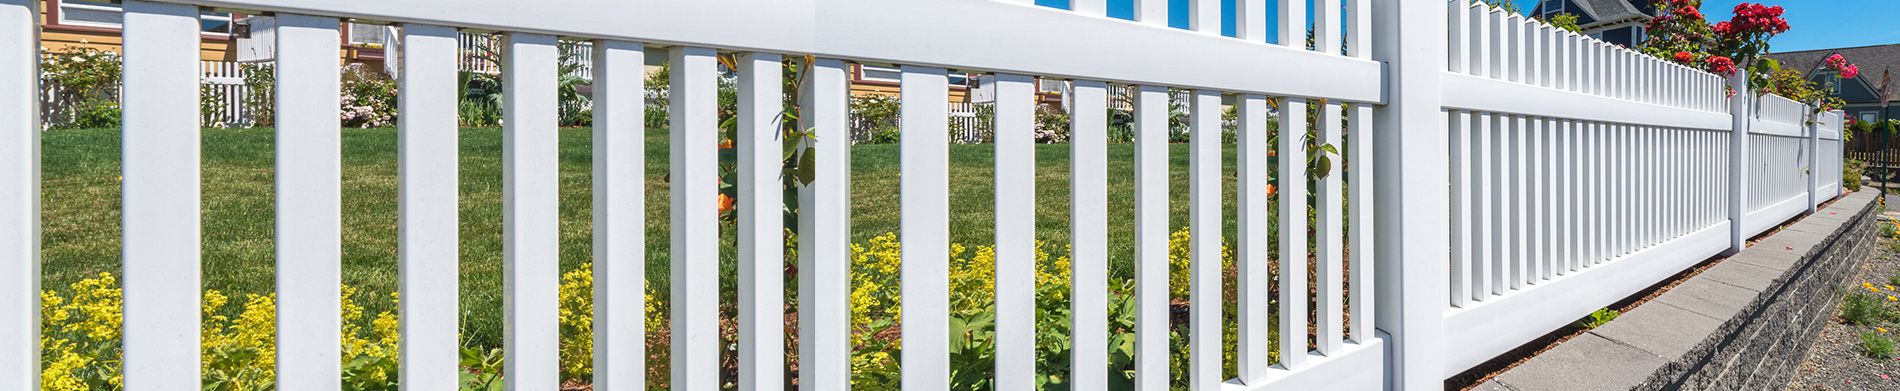 Colorado Residential Fencing Laws: Know Your Rights and Responsibilities